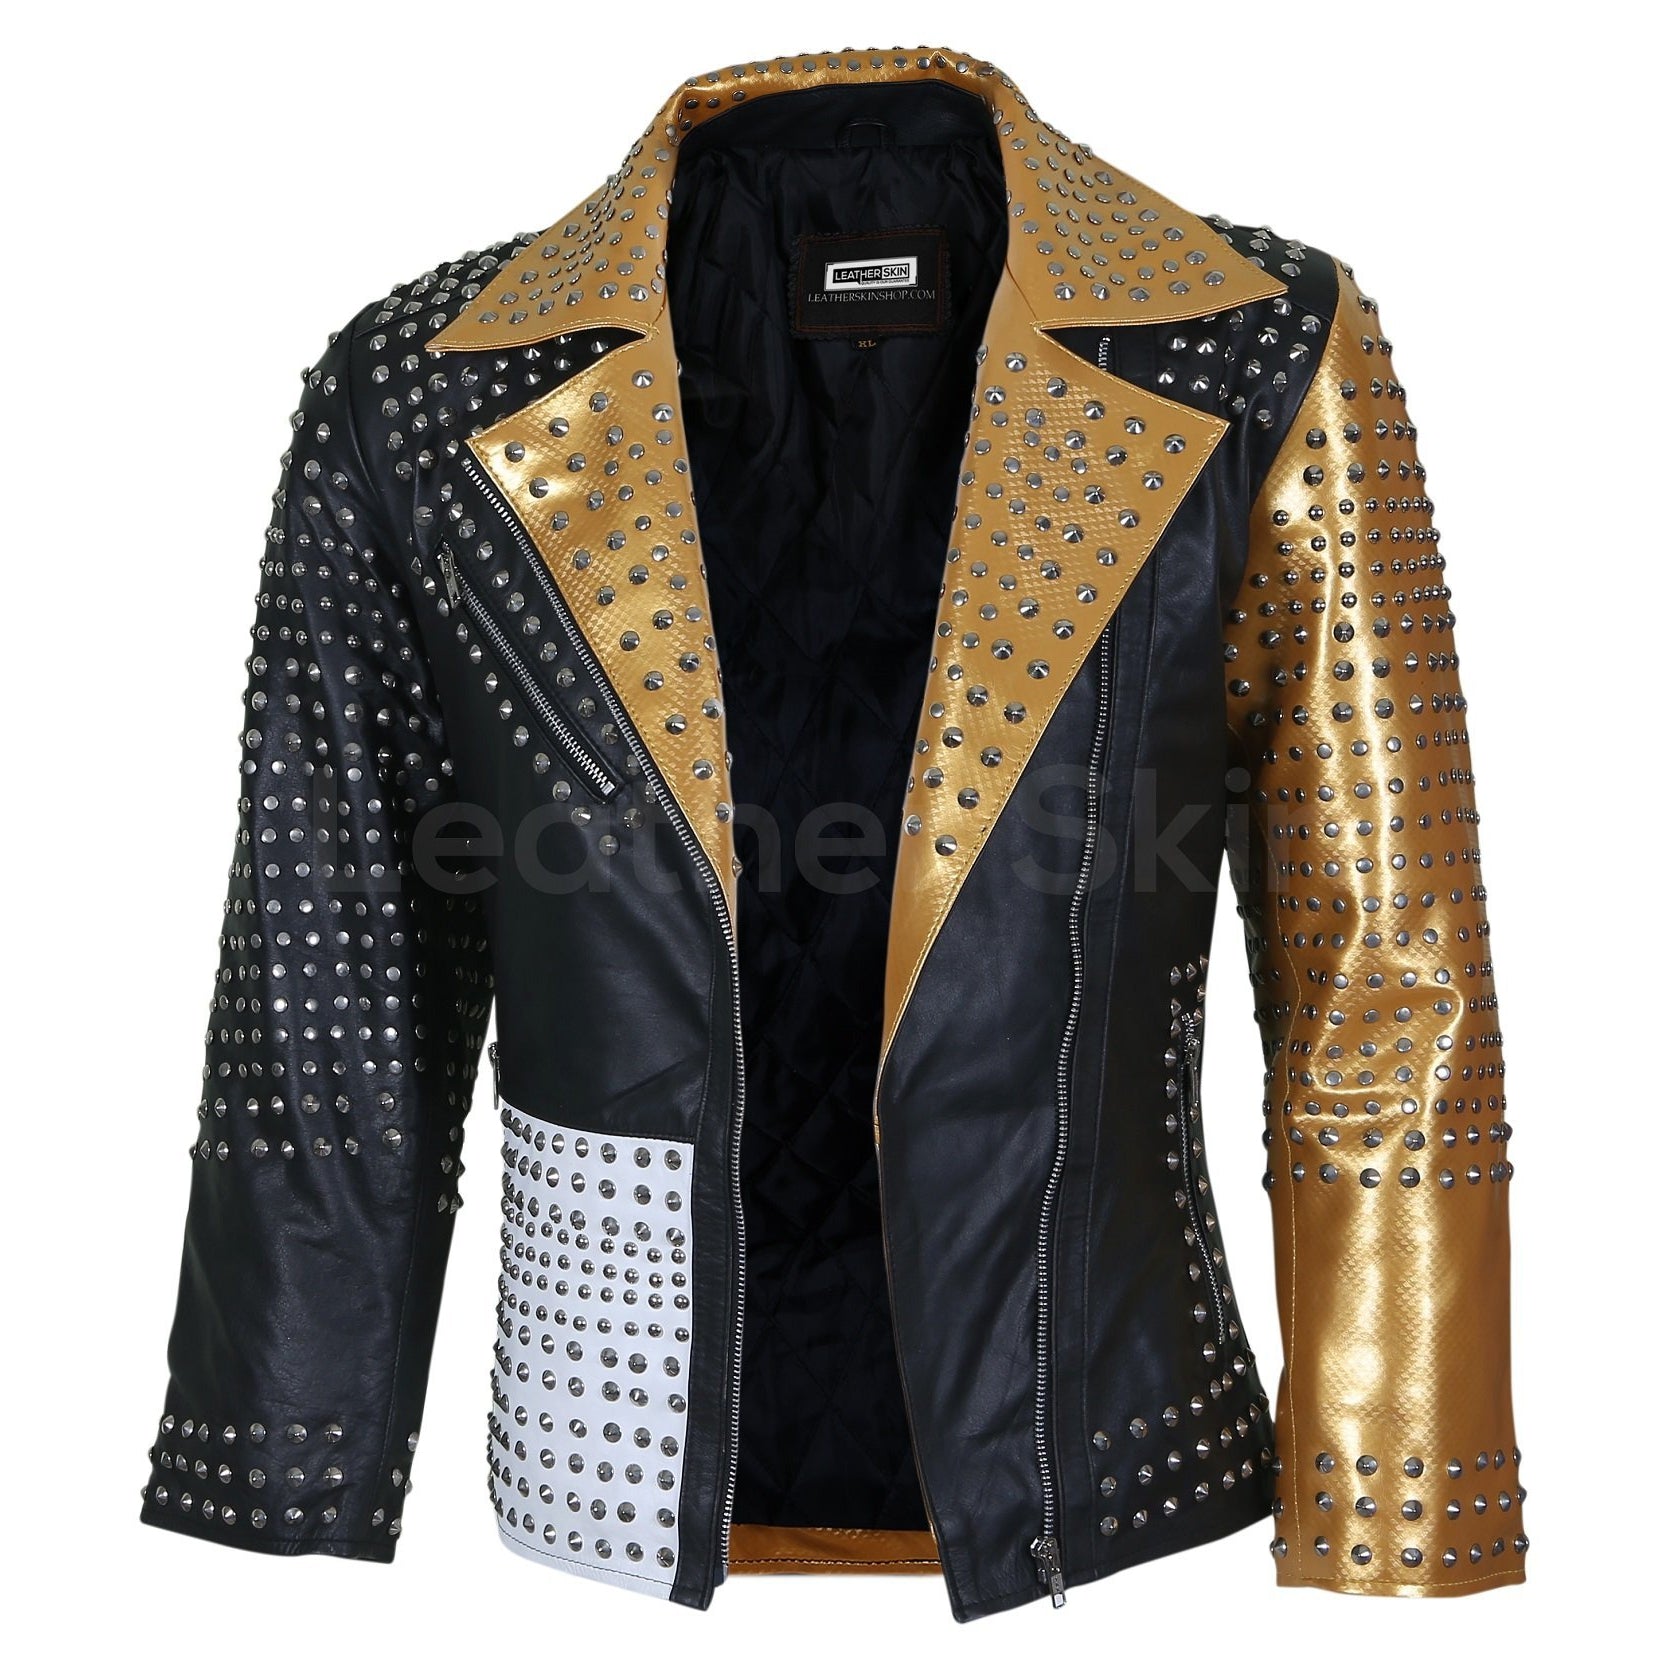 real leather jackets womens sale